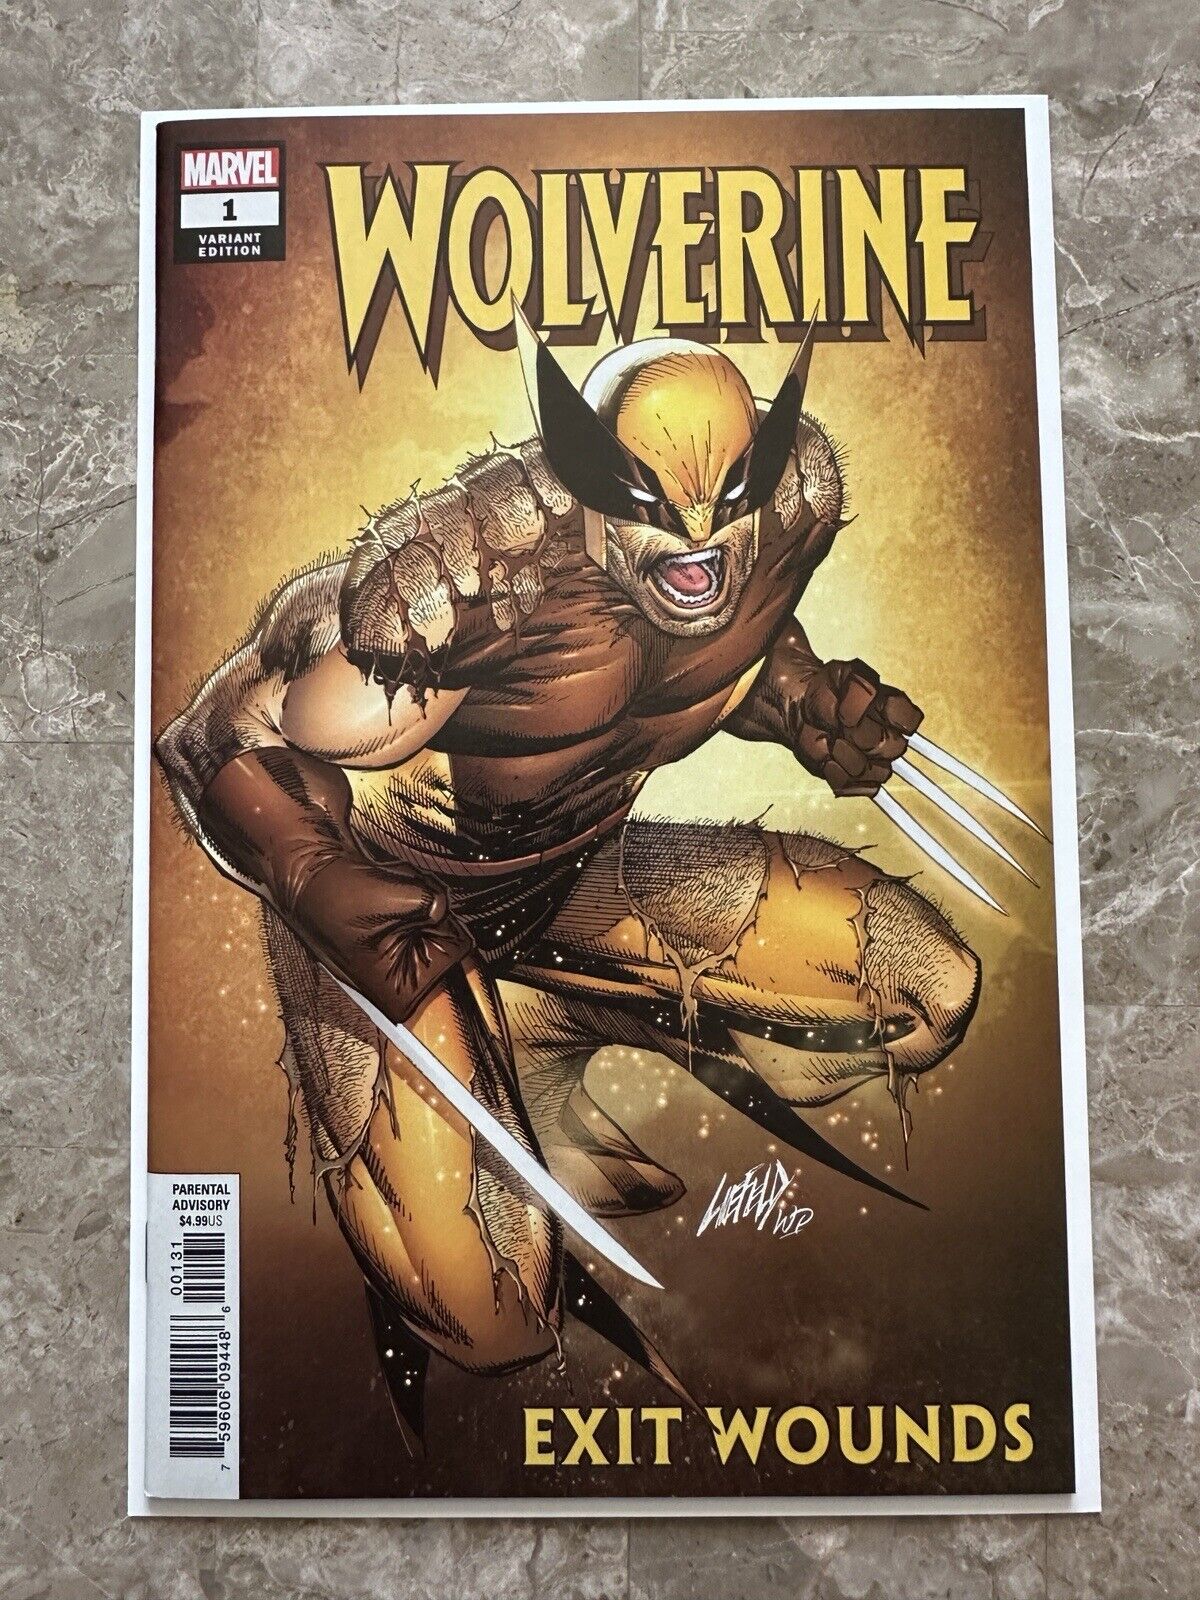 Wolverine Exit Wounds 1:50 NM 9.4-9.8 (2019 Marvel) - Rob Liefeld